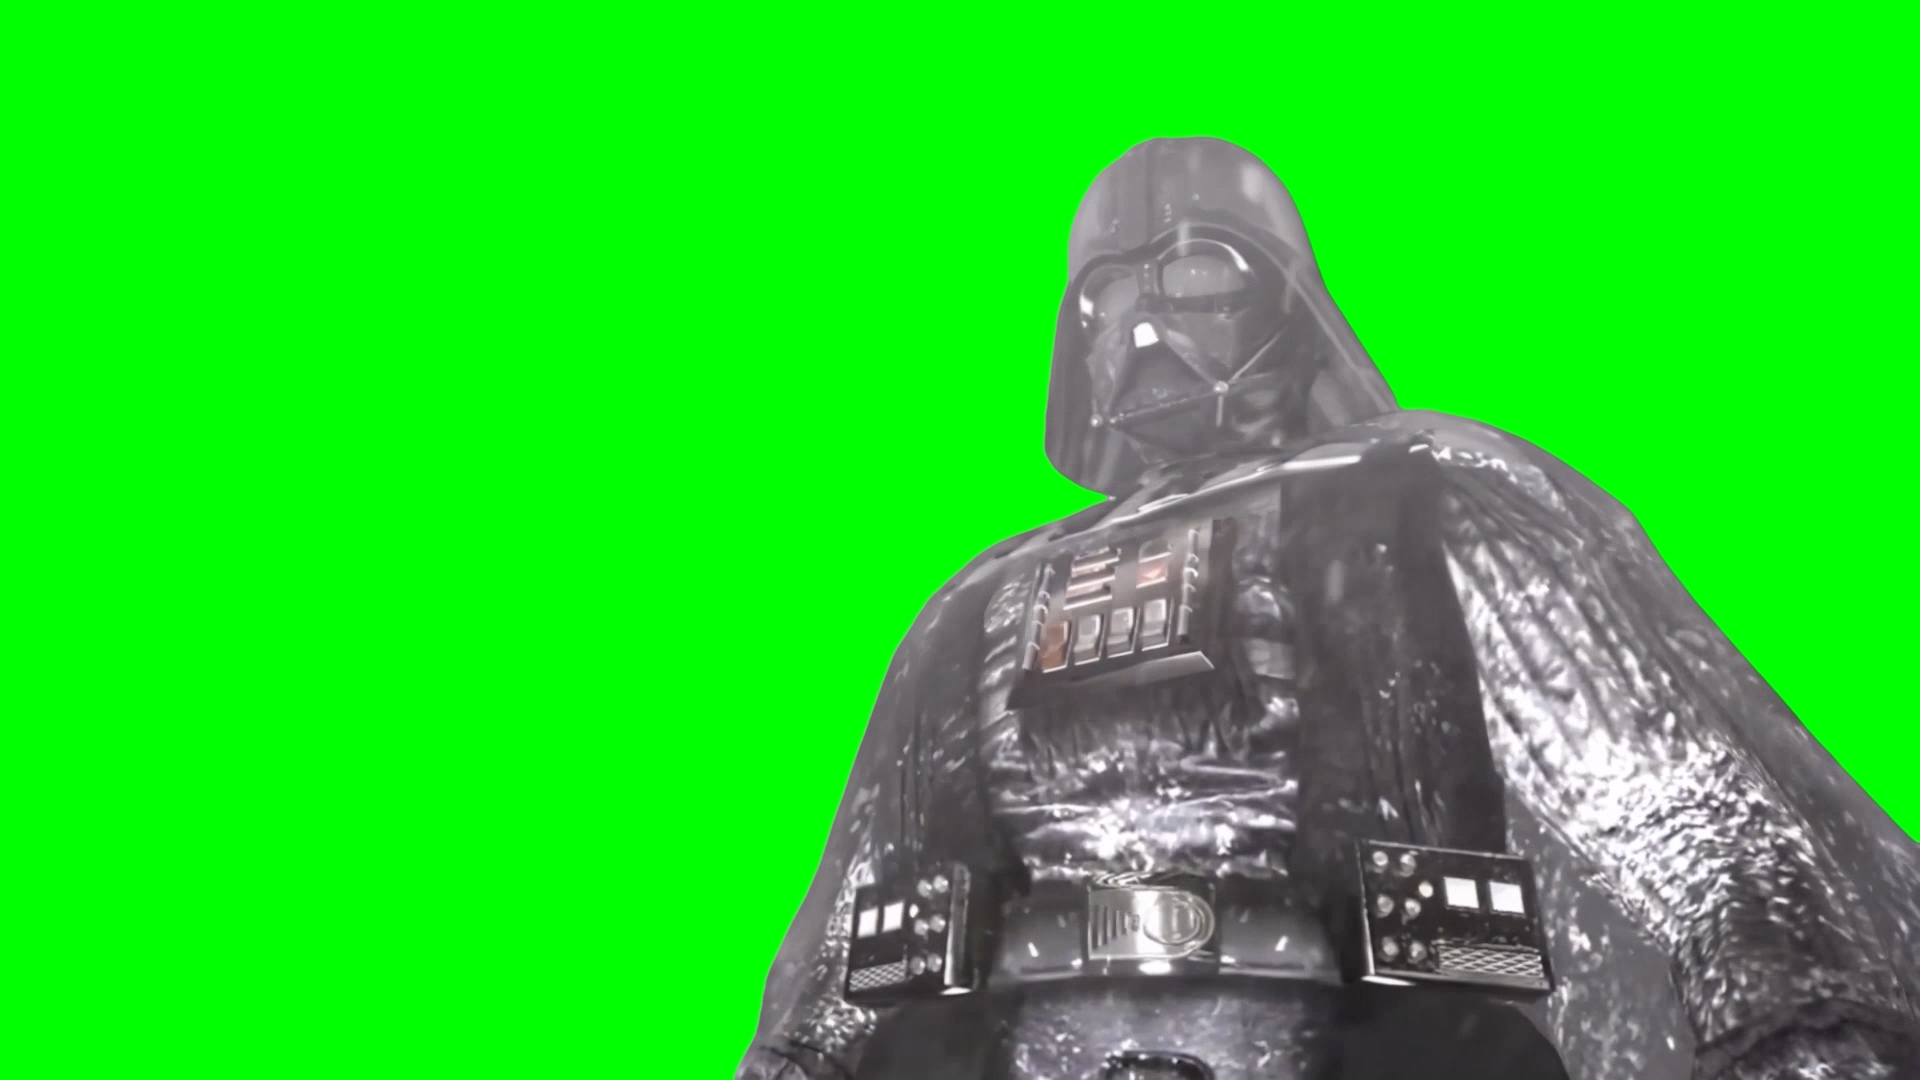 Darth Vader - I Lied - Star Wars: The Force Unleashed meme (Green Screen)